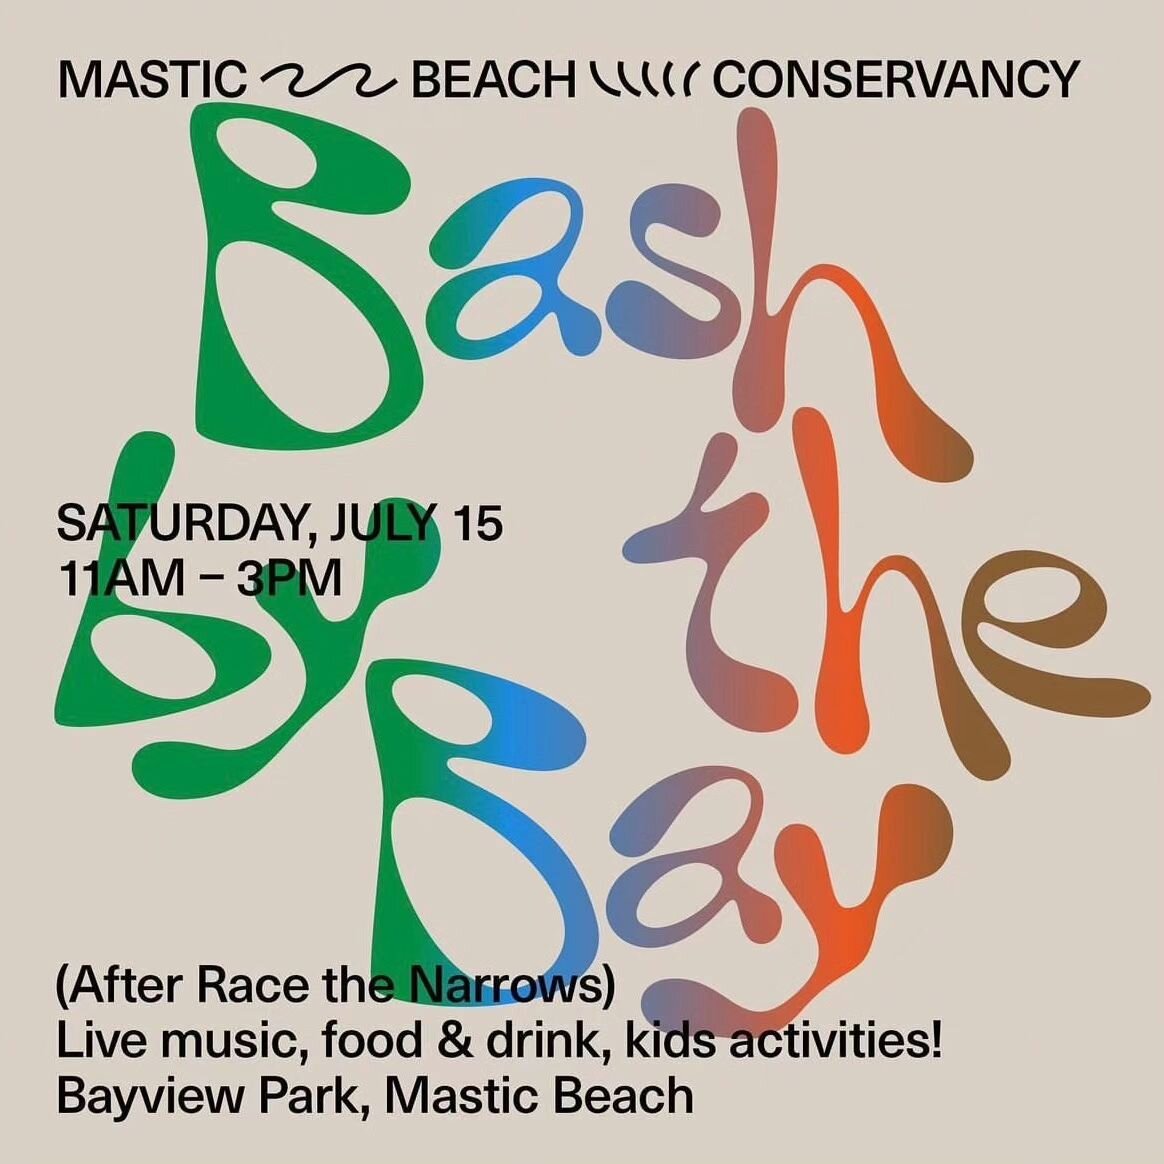 Join Friends of Bellport Bay at Bash By the Bay, this Saturday hosted by the Mastic Beach Conservancy.
It's a free community event immediately following Race the Narrows with Brooklyn Band, and lovetempo.

Irresistibly danceable, lovetempo is the new